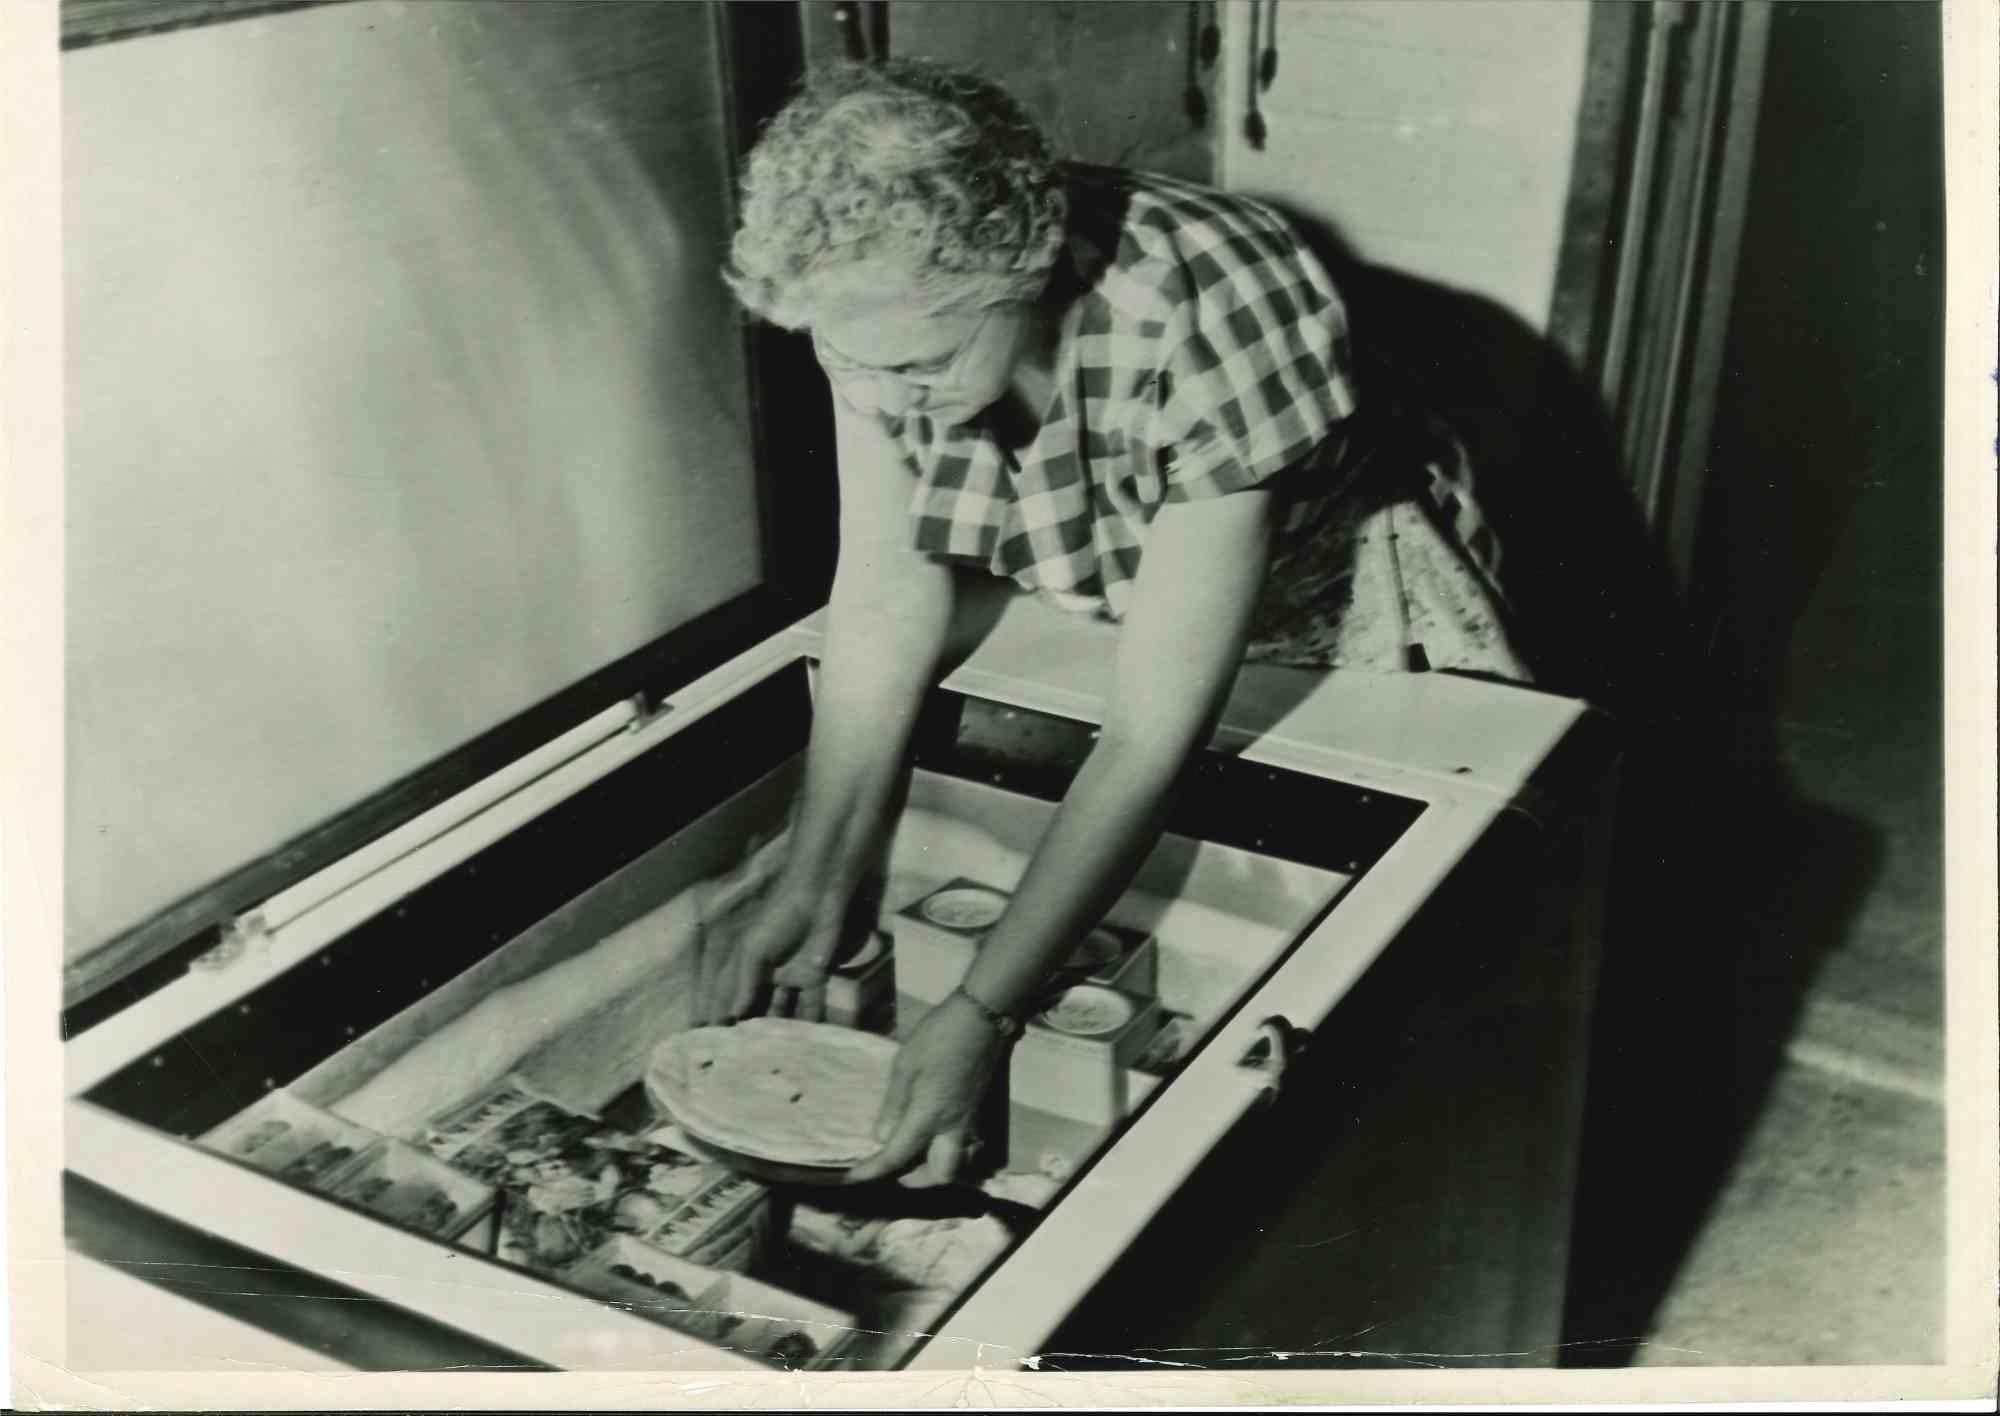 Unknown Figurative Photograph - Frozen Food Industry -  American Vintage Photograph - Mid 20th Century